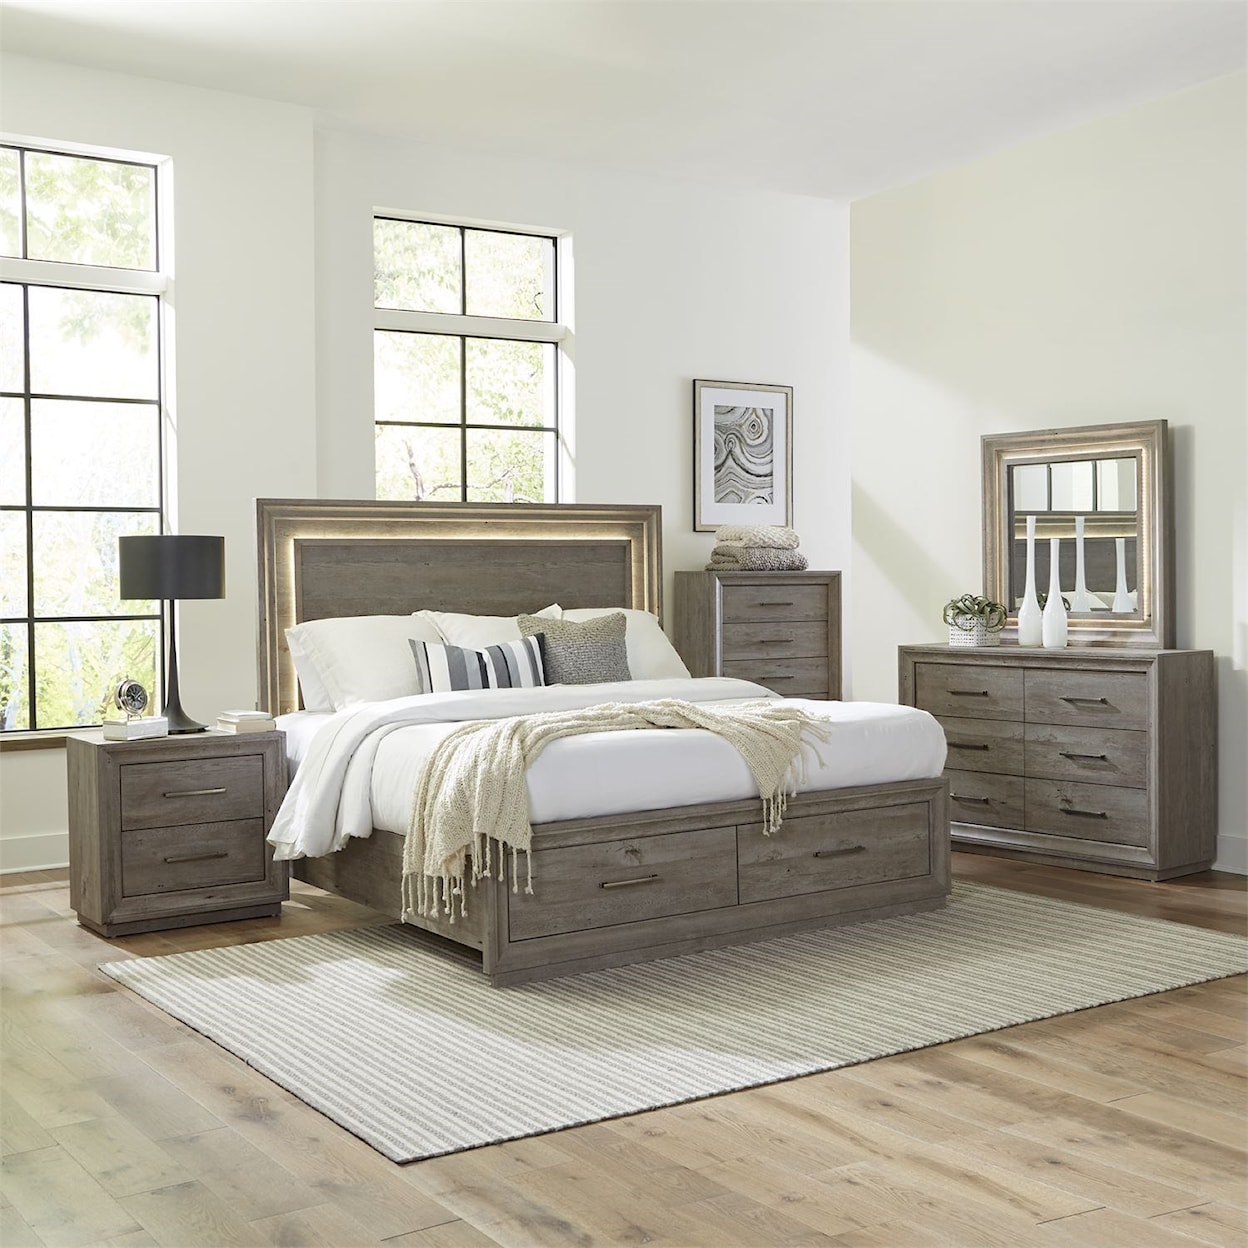 Libby Horizons Queen Storage Bed